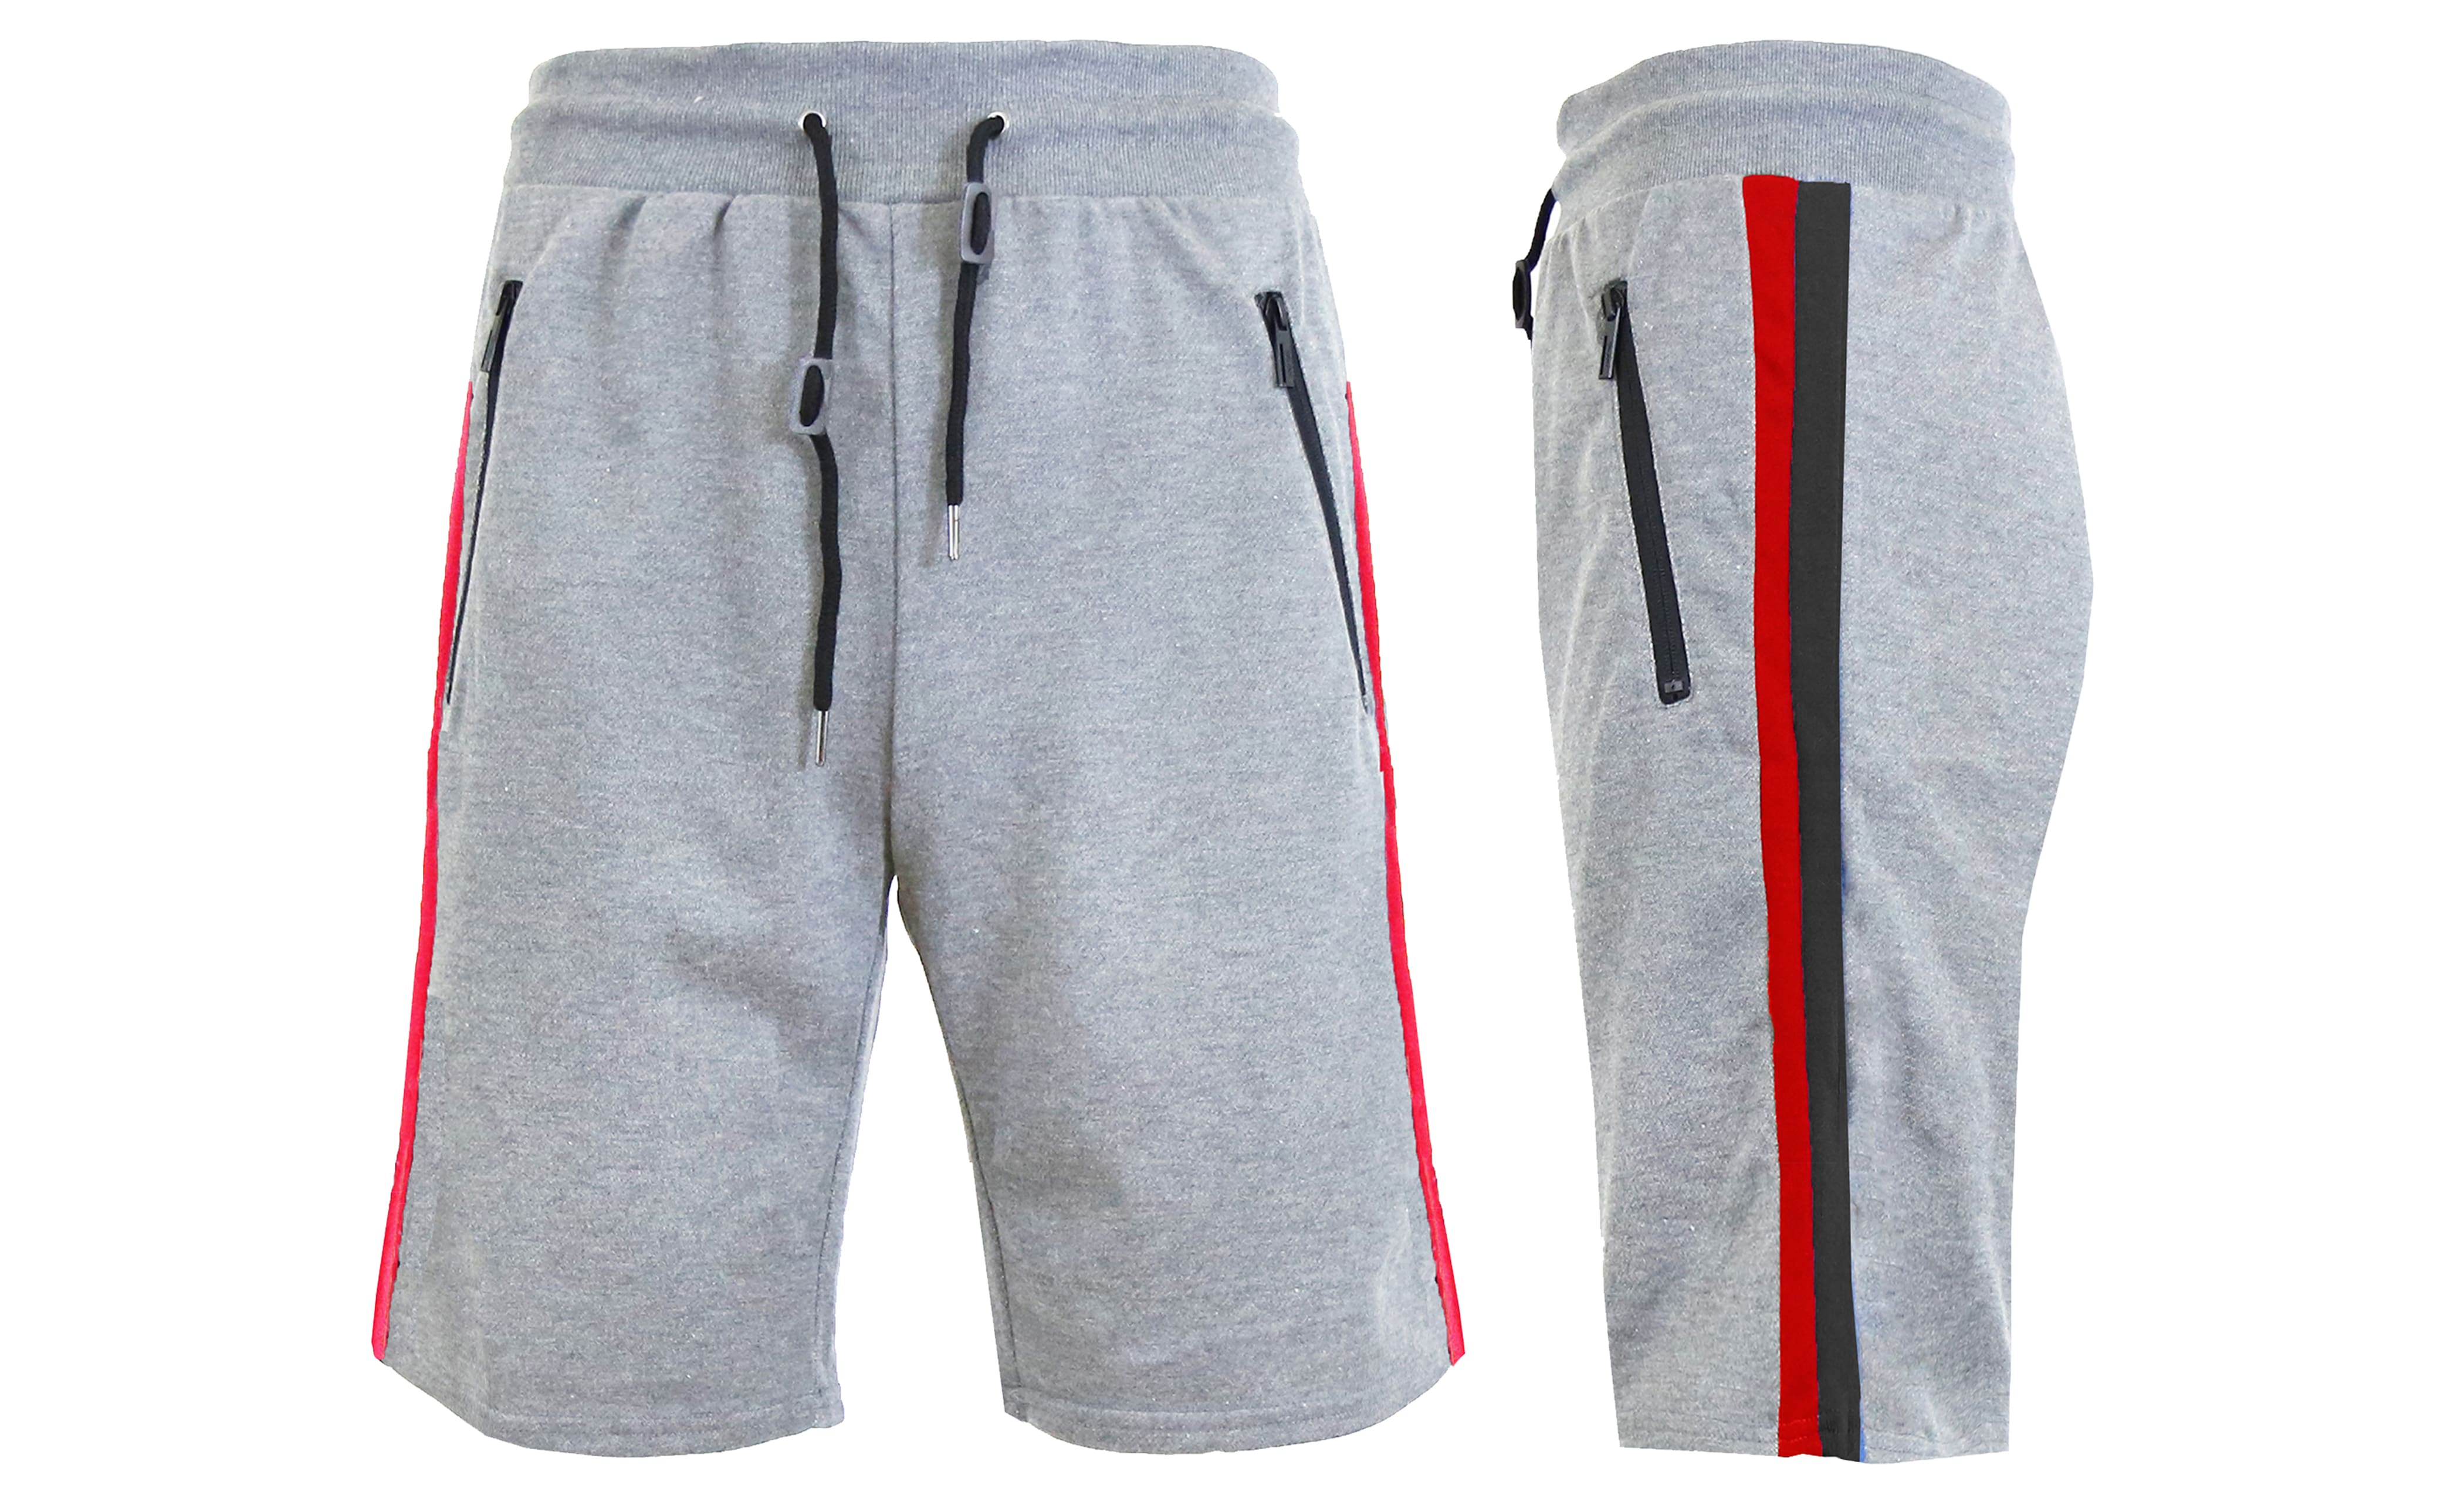 Galaxy By Harvic French Terry Sweat Shorts With Contrast Trims & Side Zipper Pockets